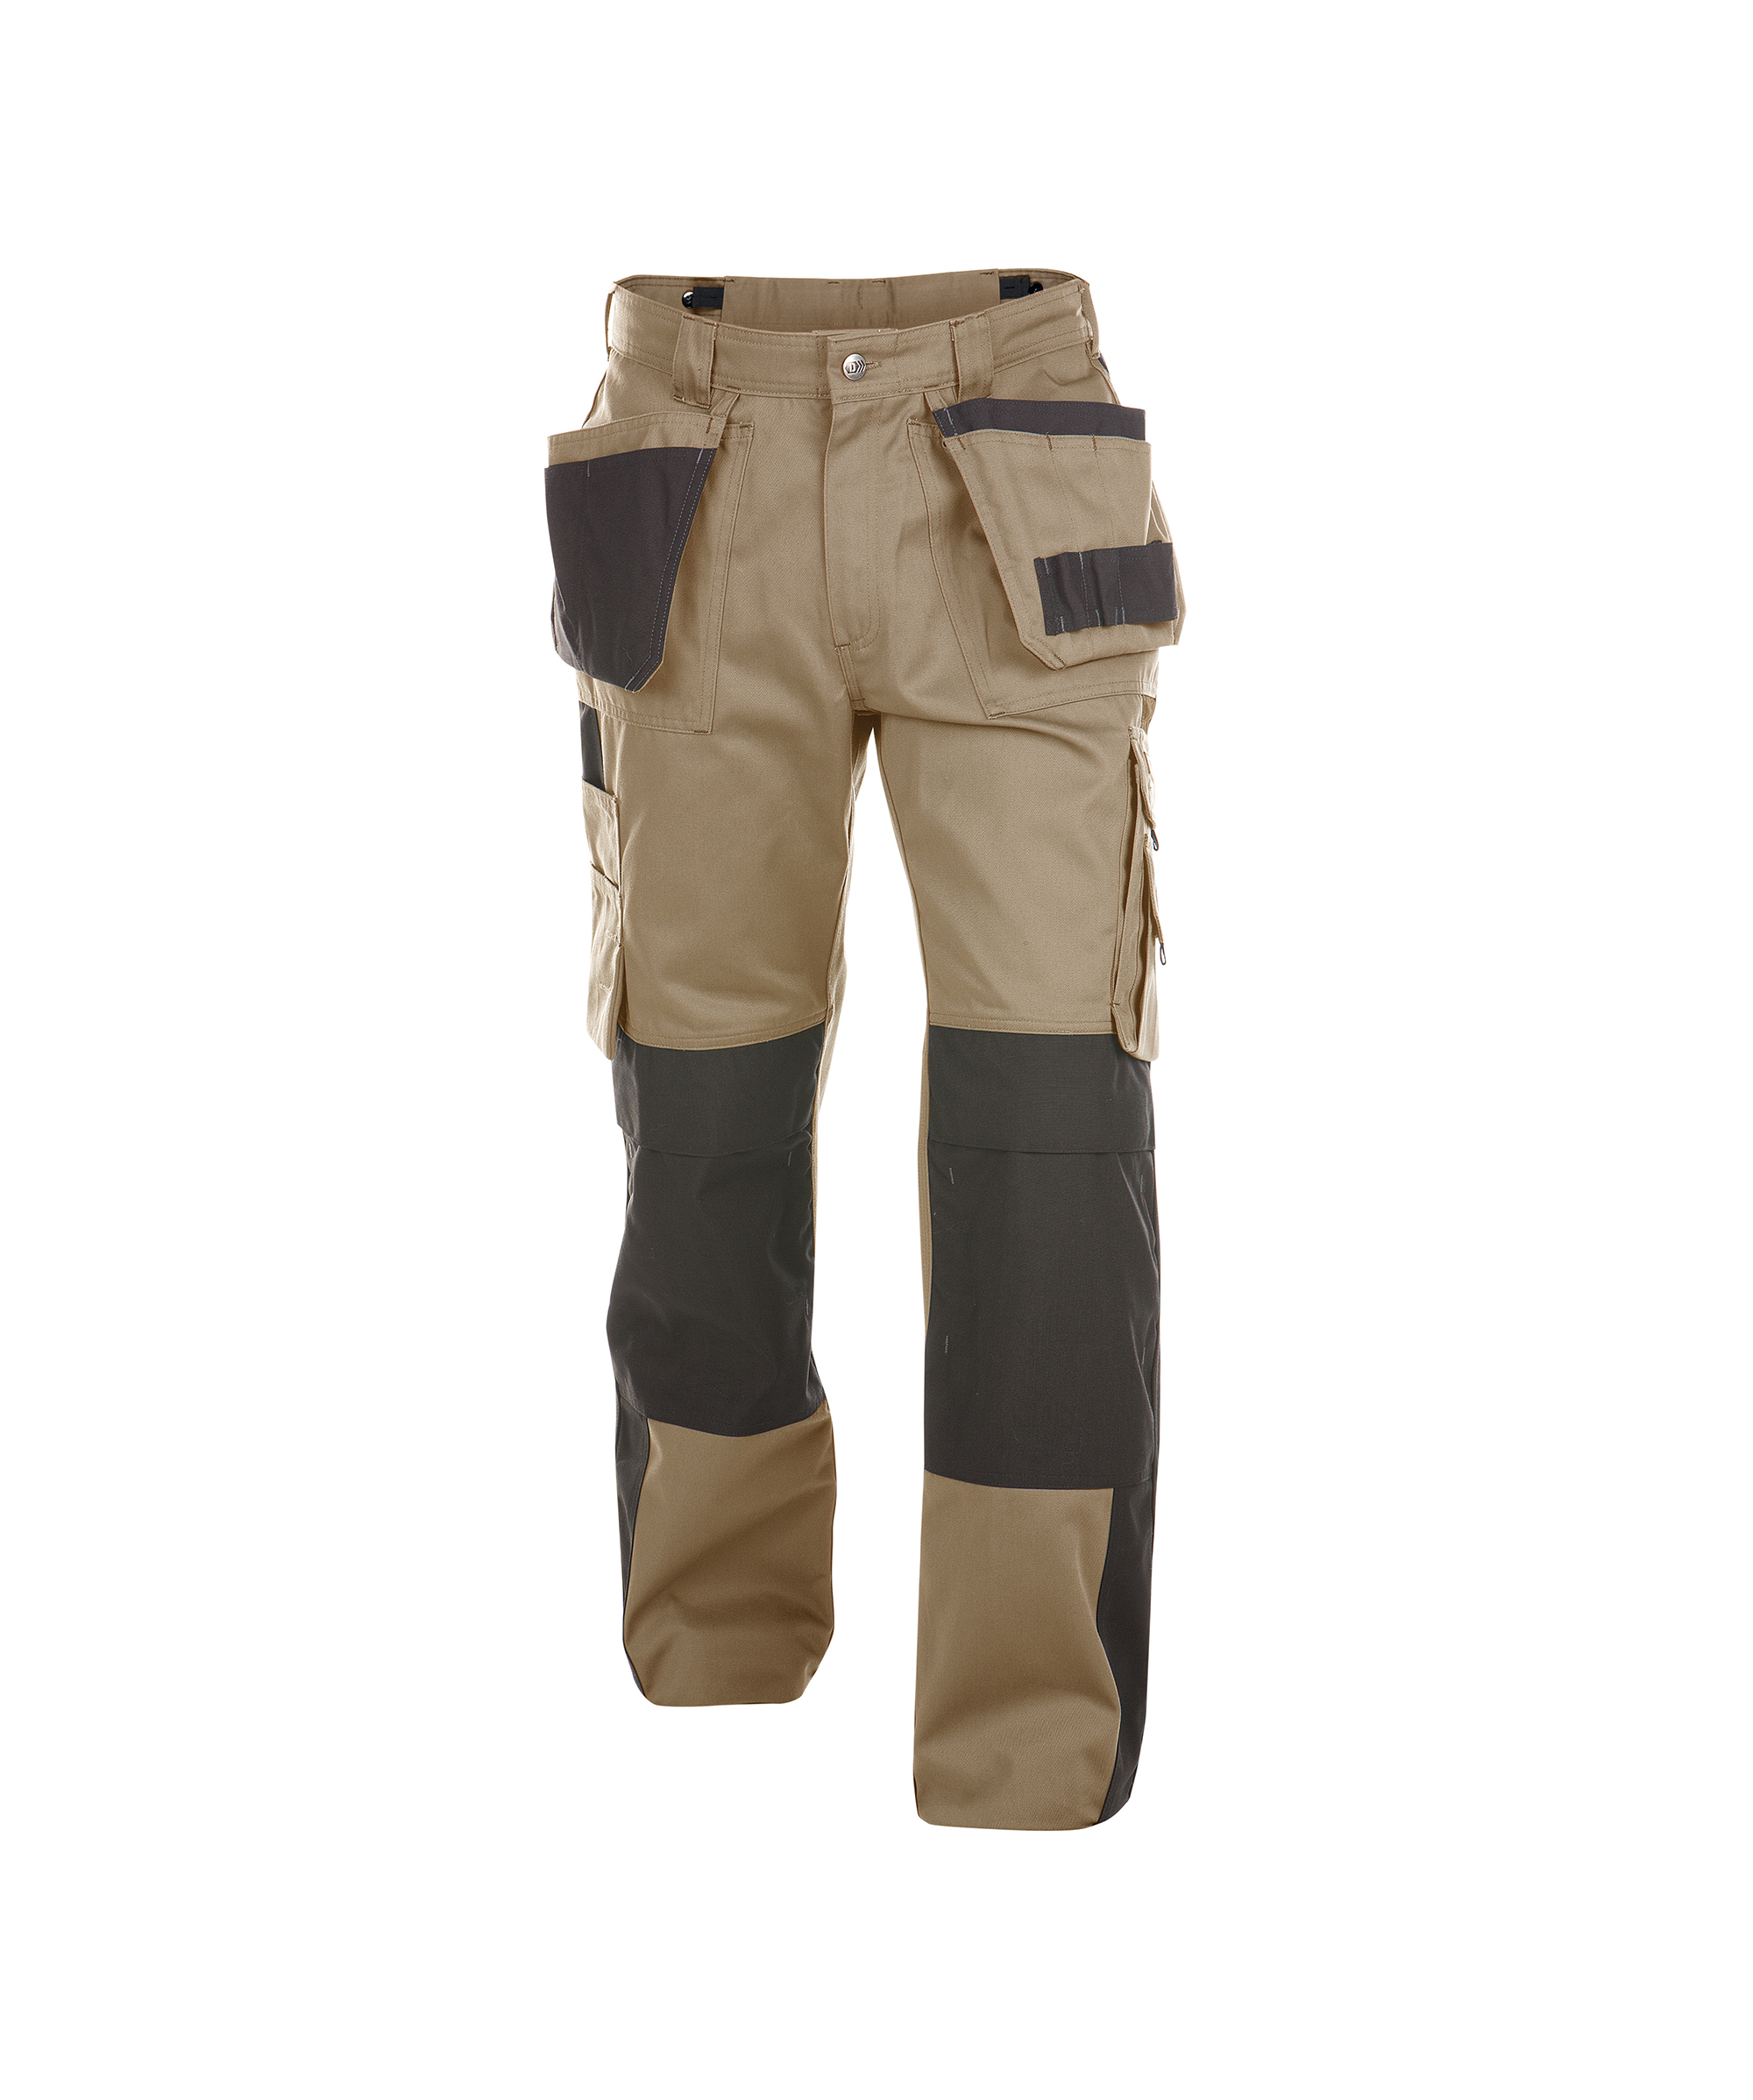 seattle_two-tone-work-trousers-with-multi-pockets-and-knee-pockets_beige-black_front.jpg